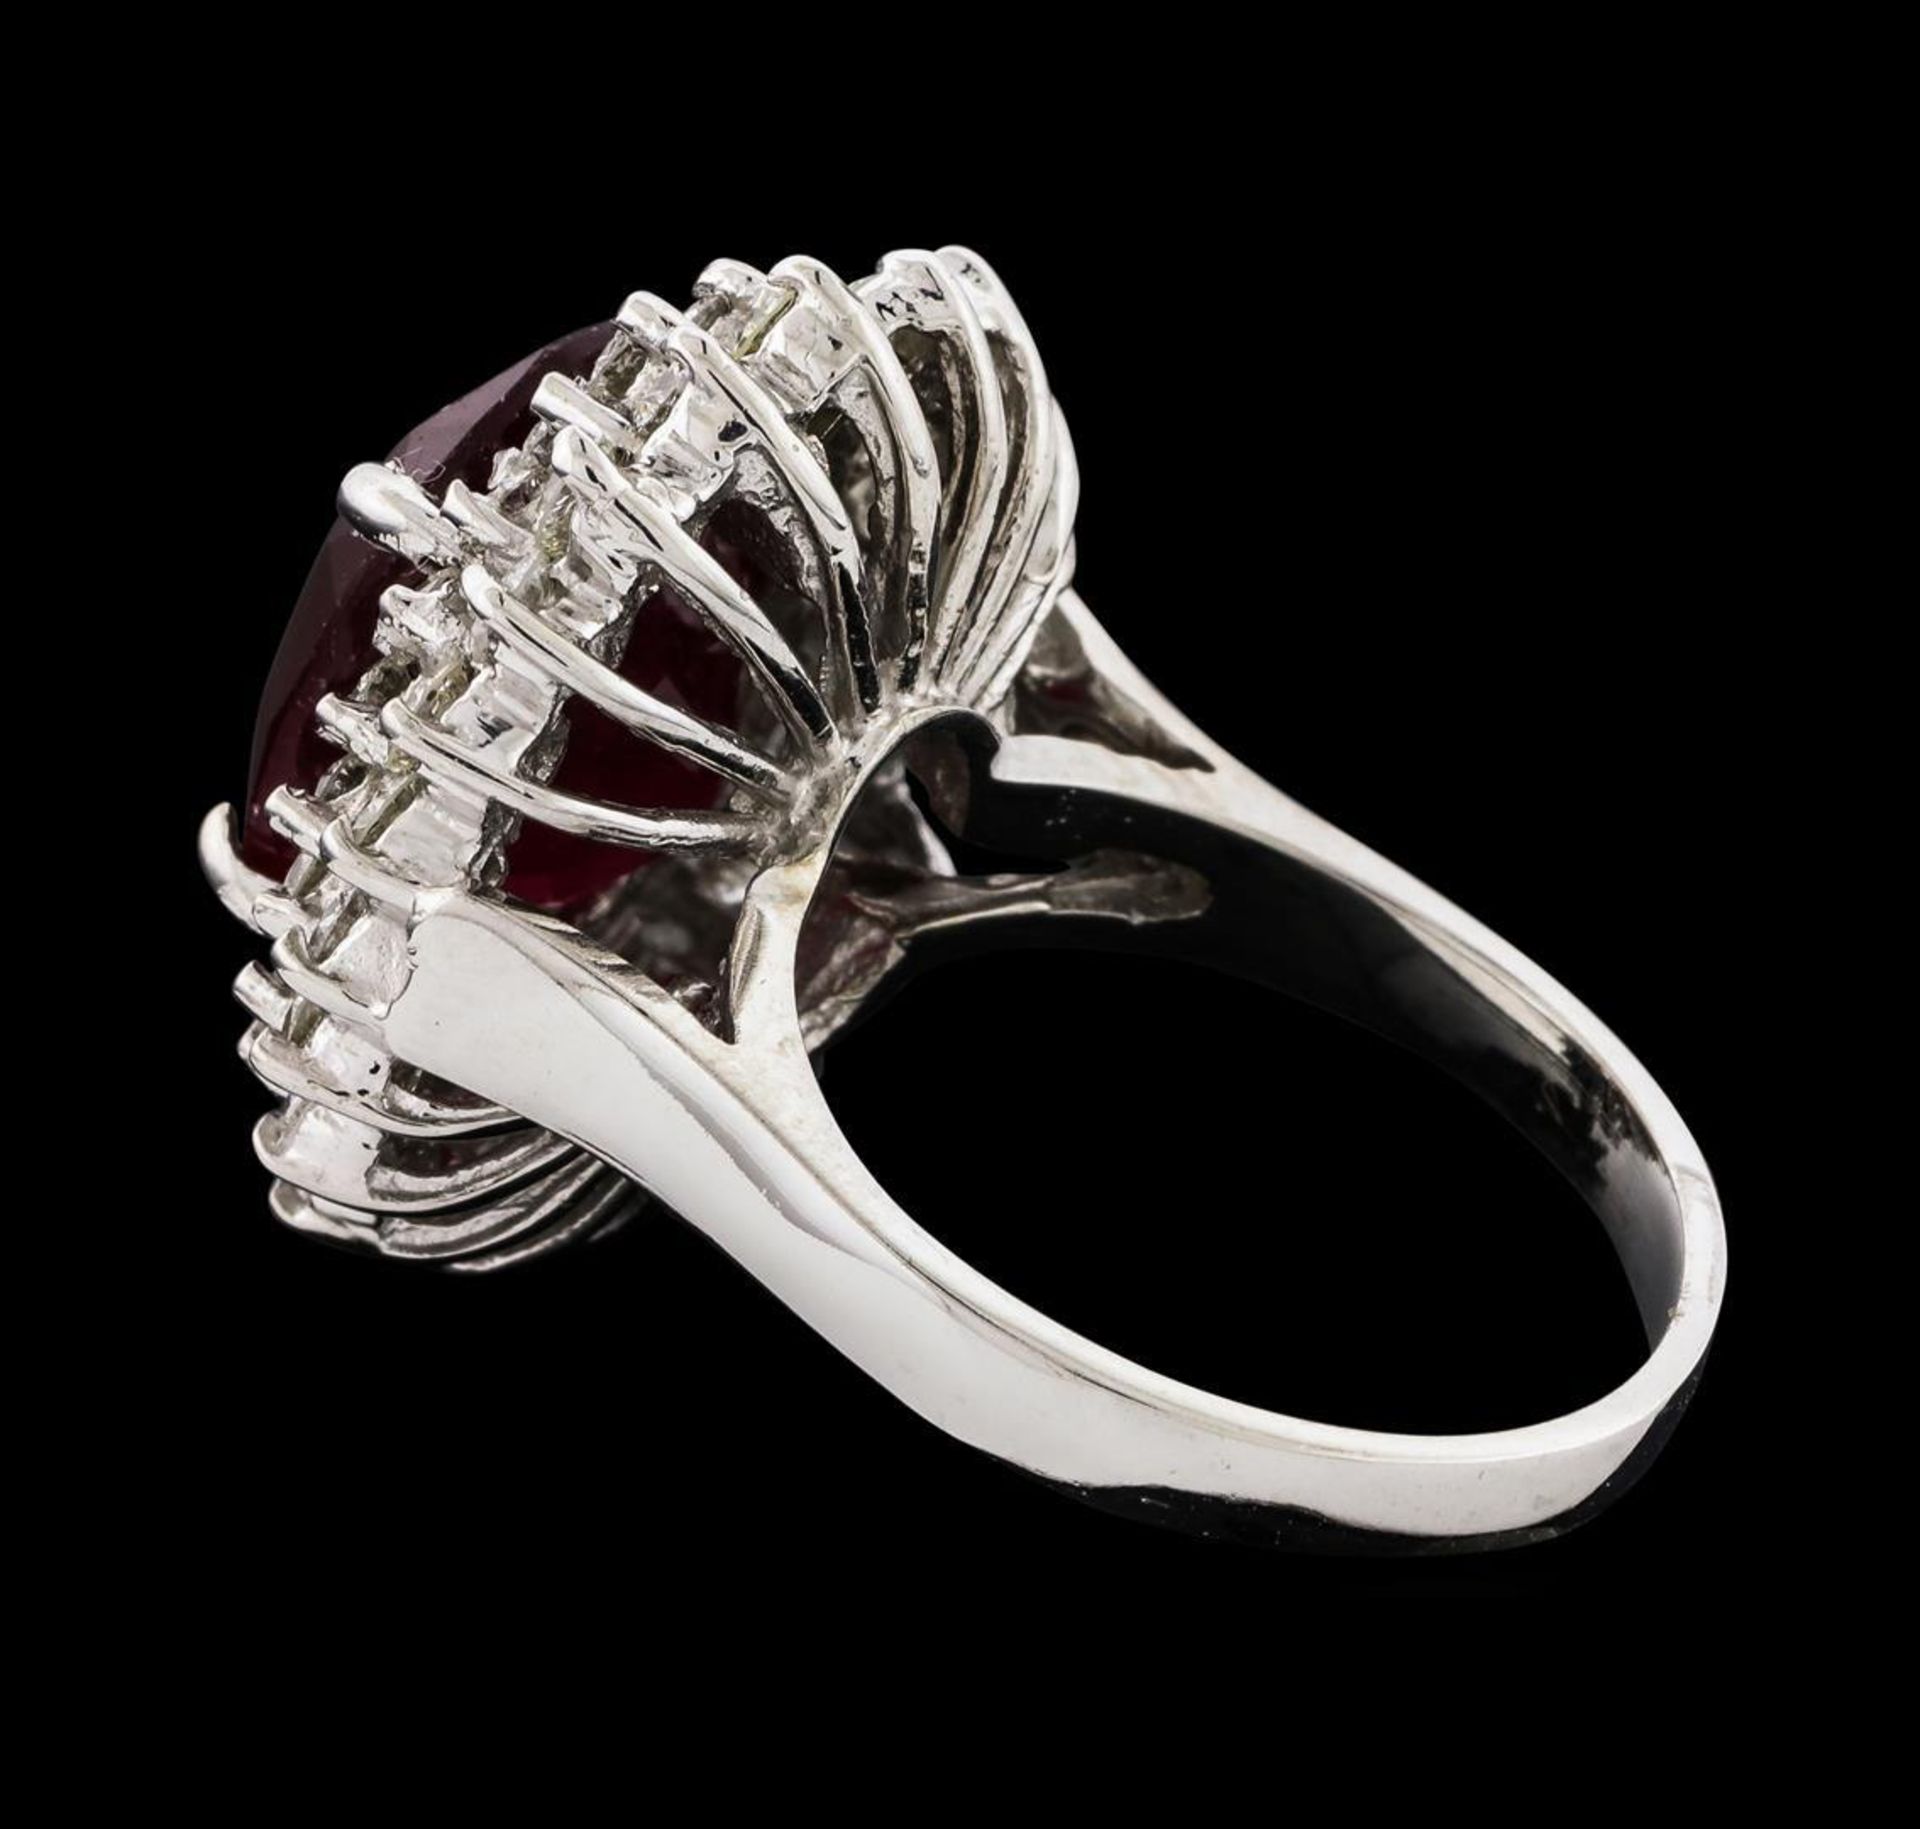 9.62 ctw Ruby and Diamond Ring - 14KT White Gold - Image 3 of 5